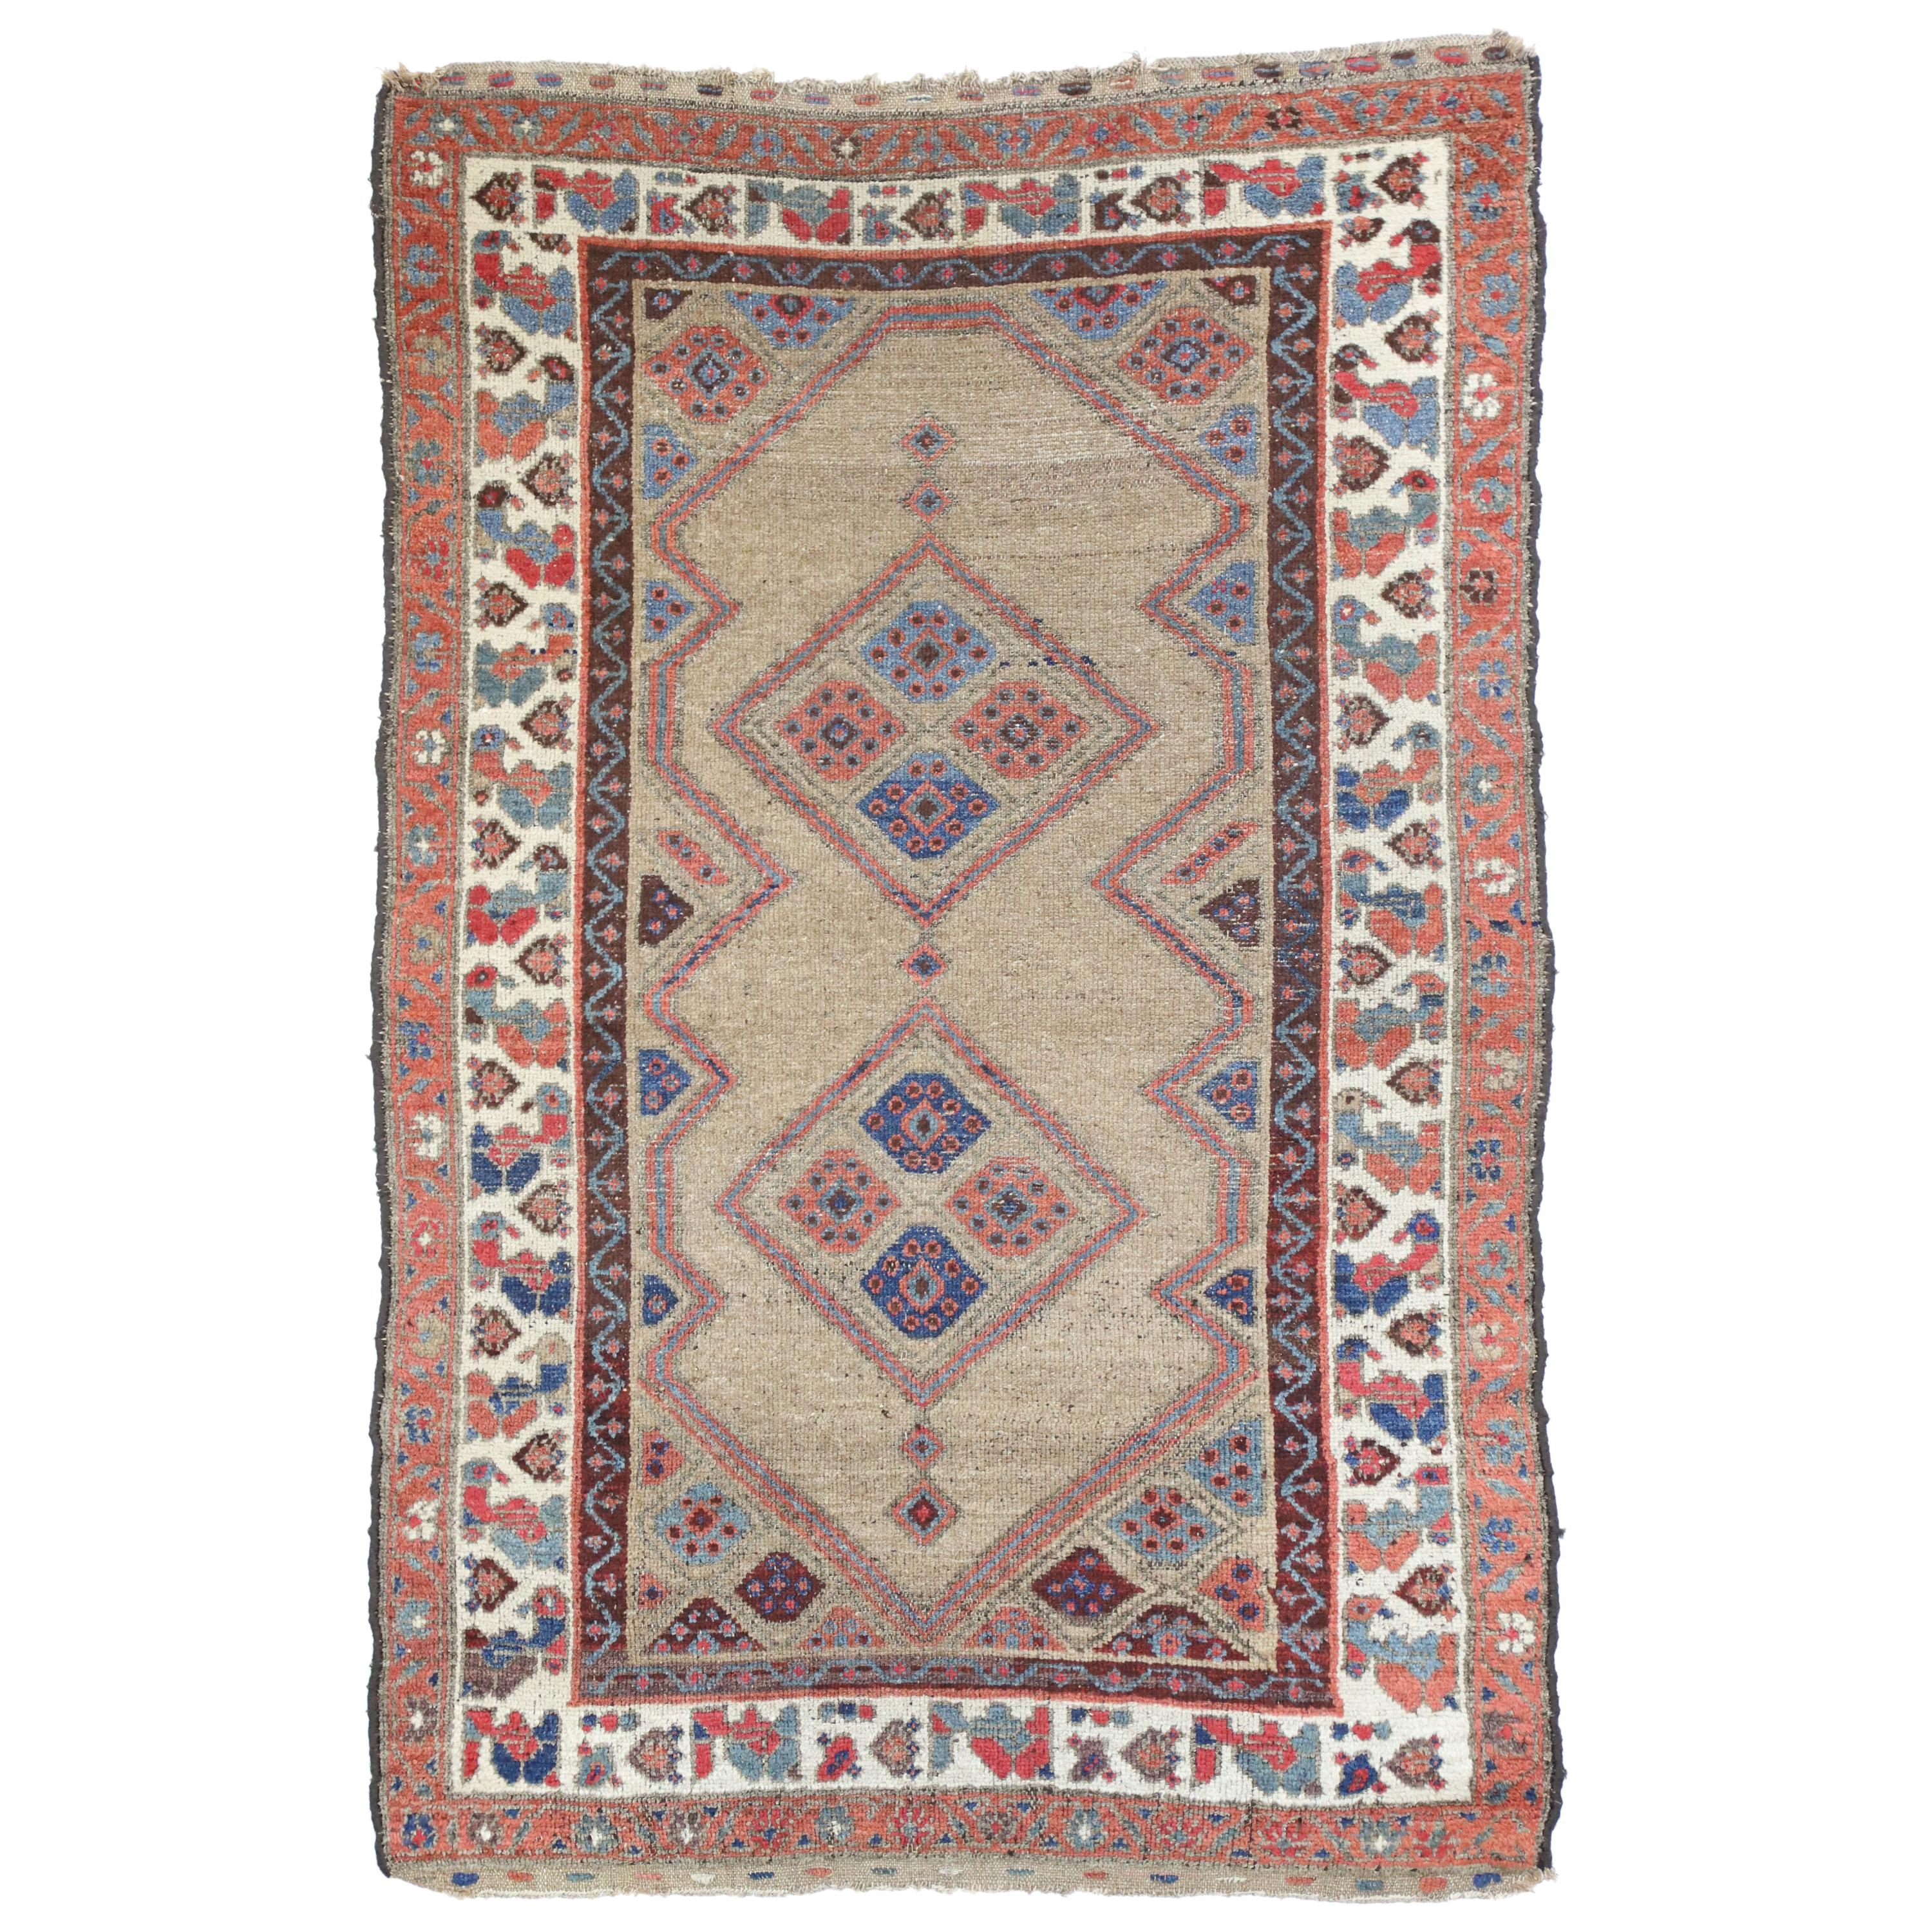 Antique Persian Malayer Accent Rug, Entry or Foyer Rug